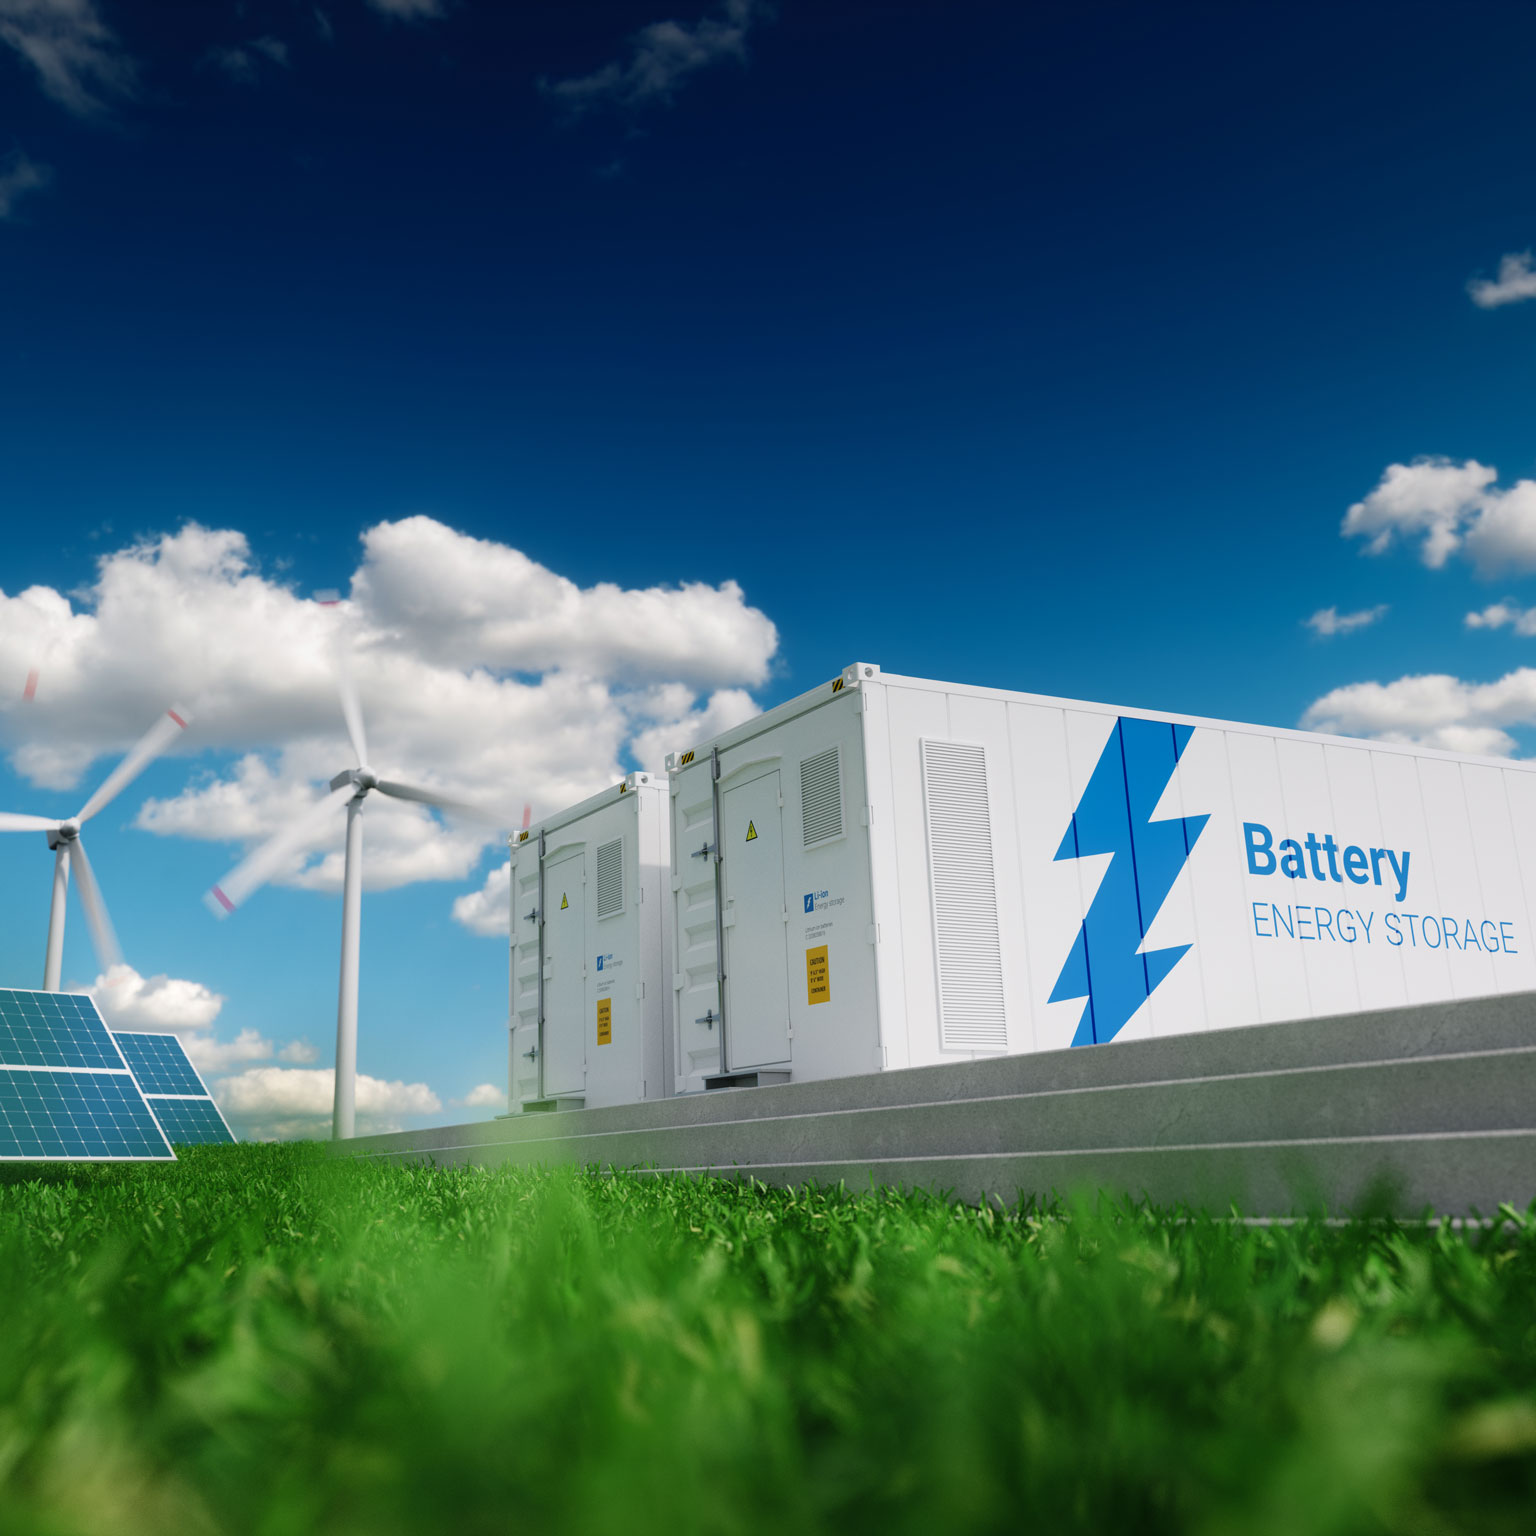 Global energy storage market expected to reach 22.2 GW in 2023, finds GlobalData